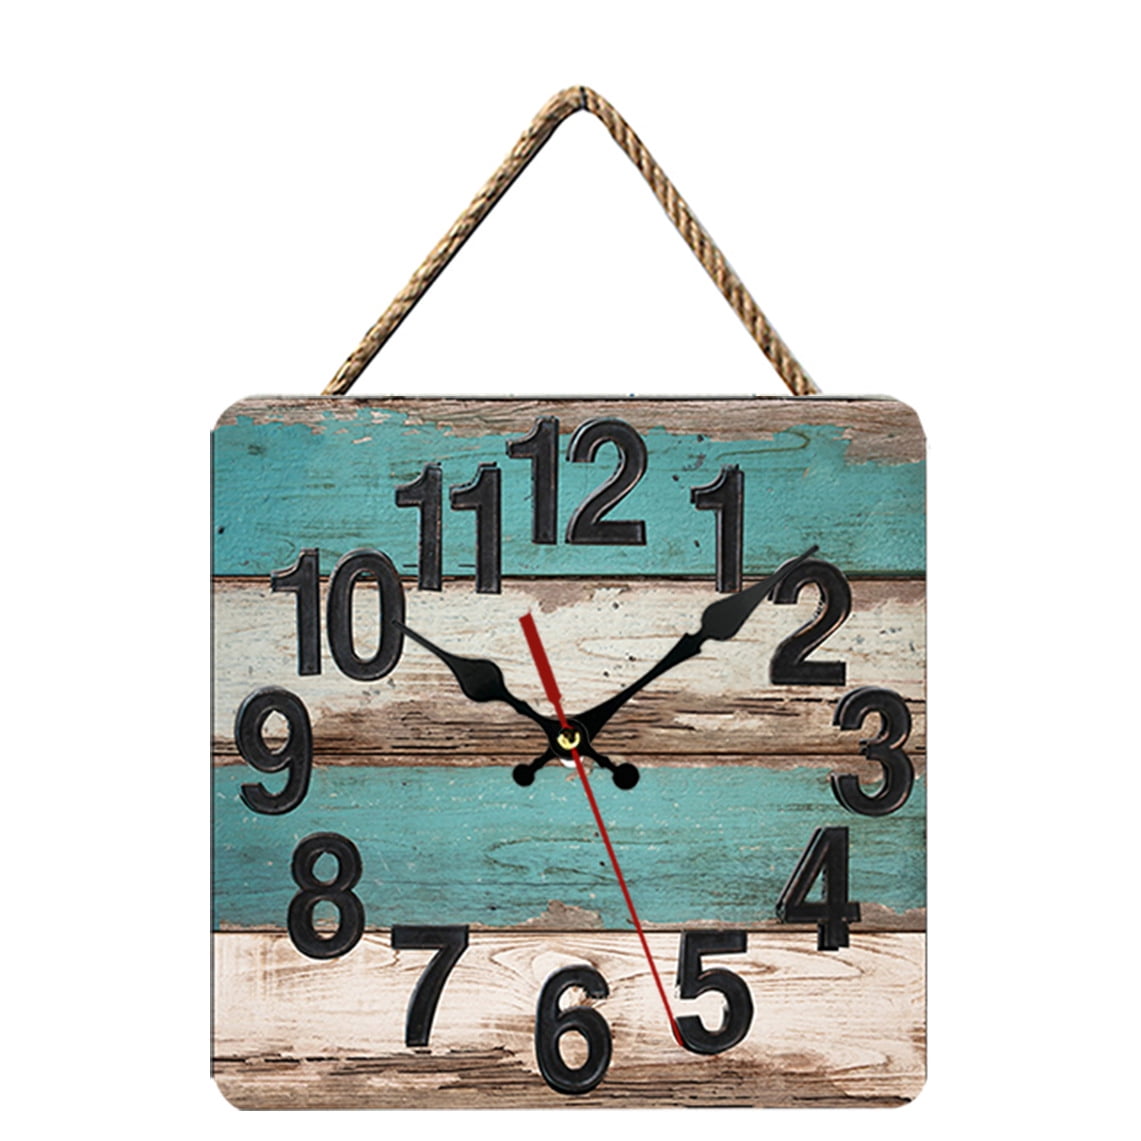 Wood Growth-Rings Wall Clock Battery Operated Non Ticking Silent Quartz Analog Rustic Farmhouse Round Clock Retro Decor for Home Kitchen Living Room Bathroom